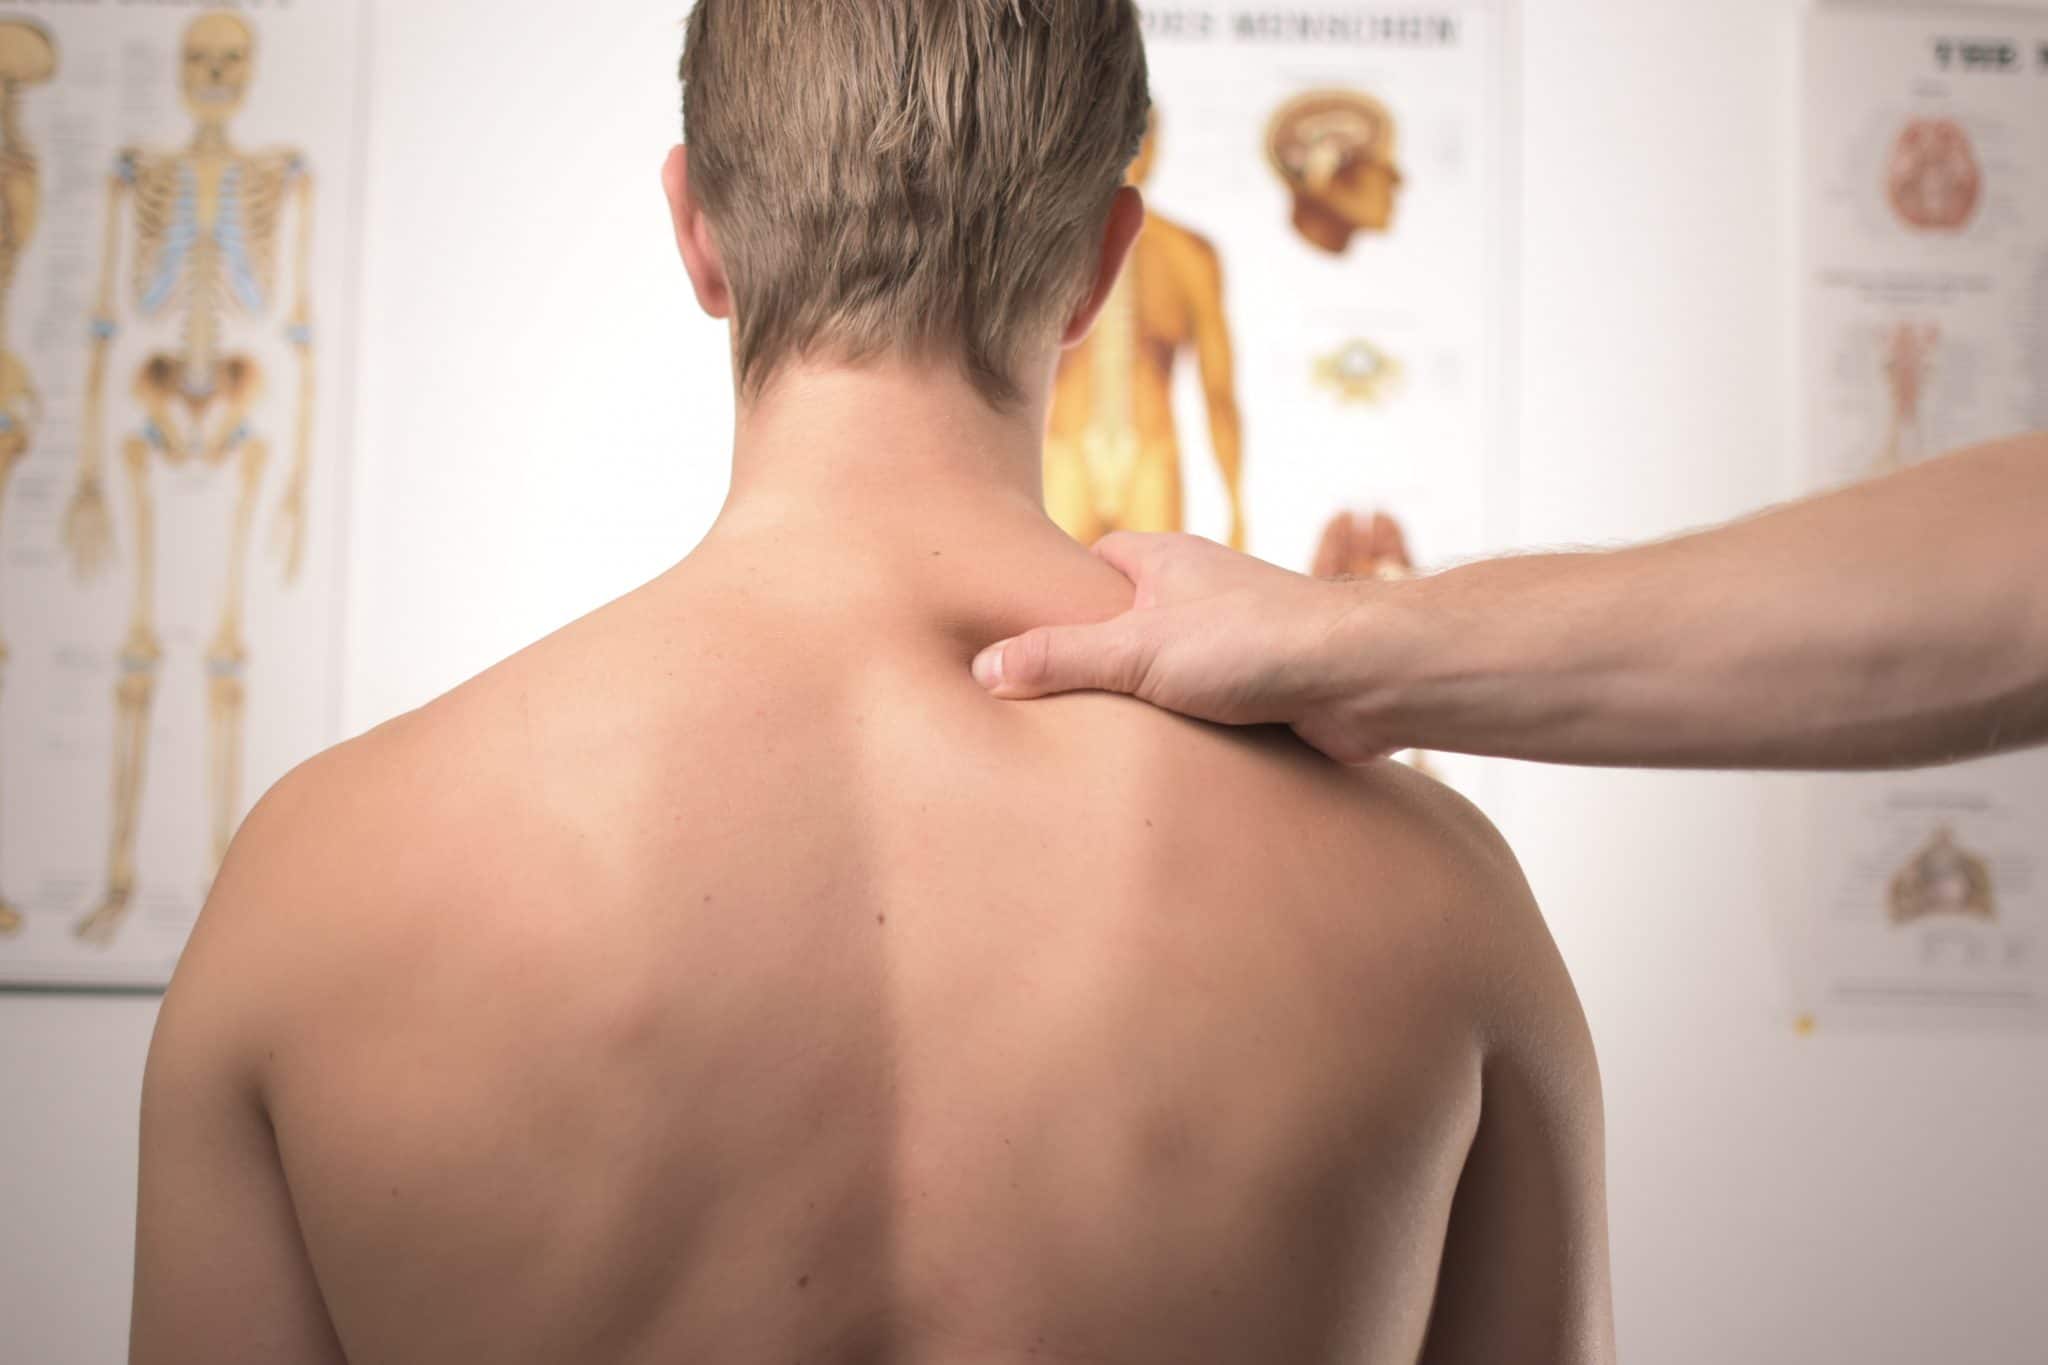 Visiting chiropractor for upper back pain